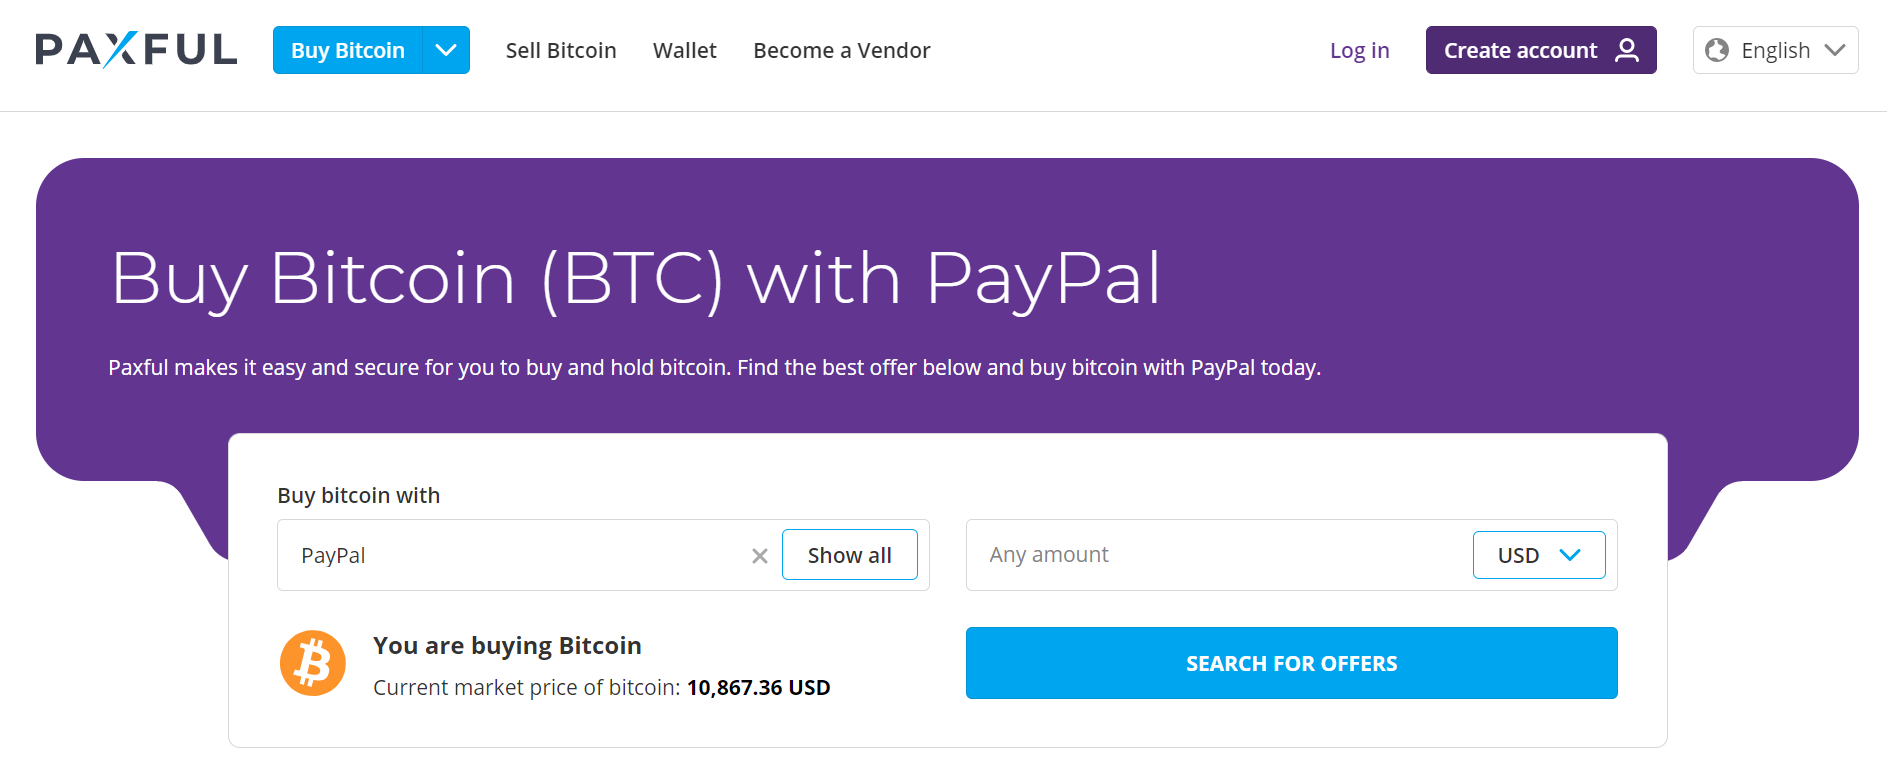 can you purchase bitcoins with paypal